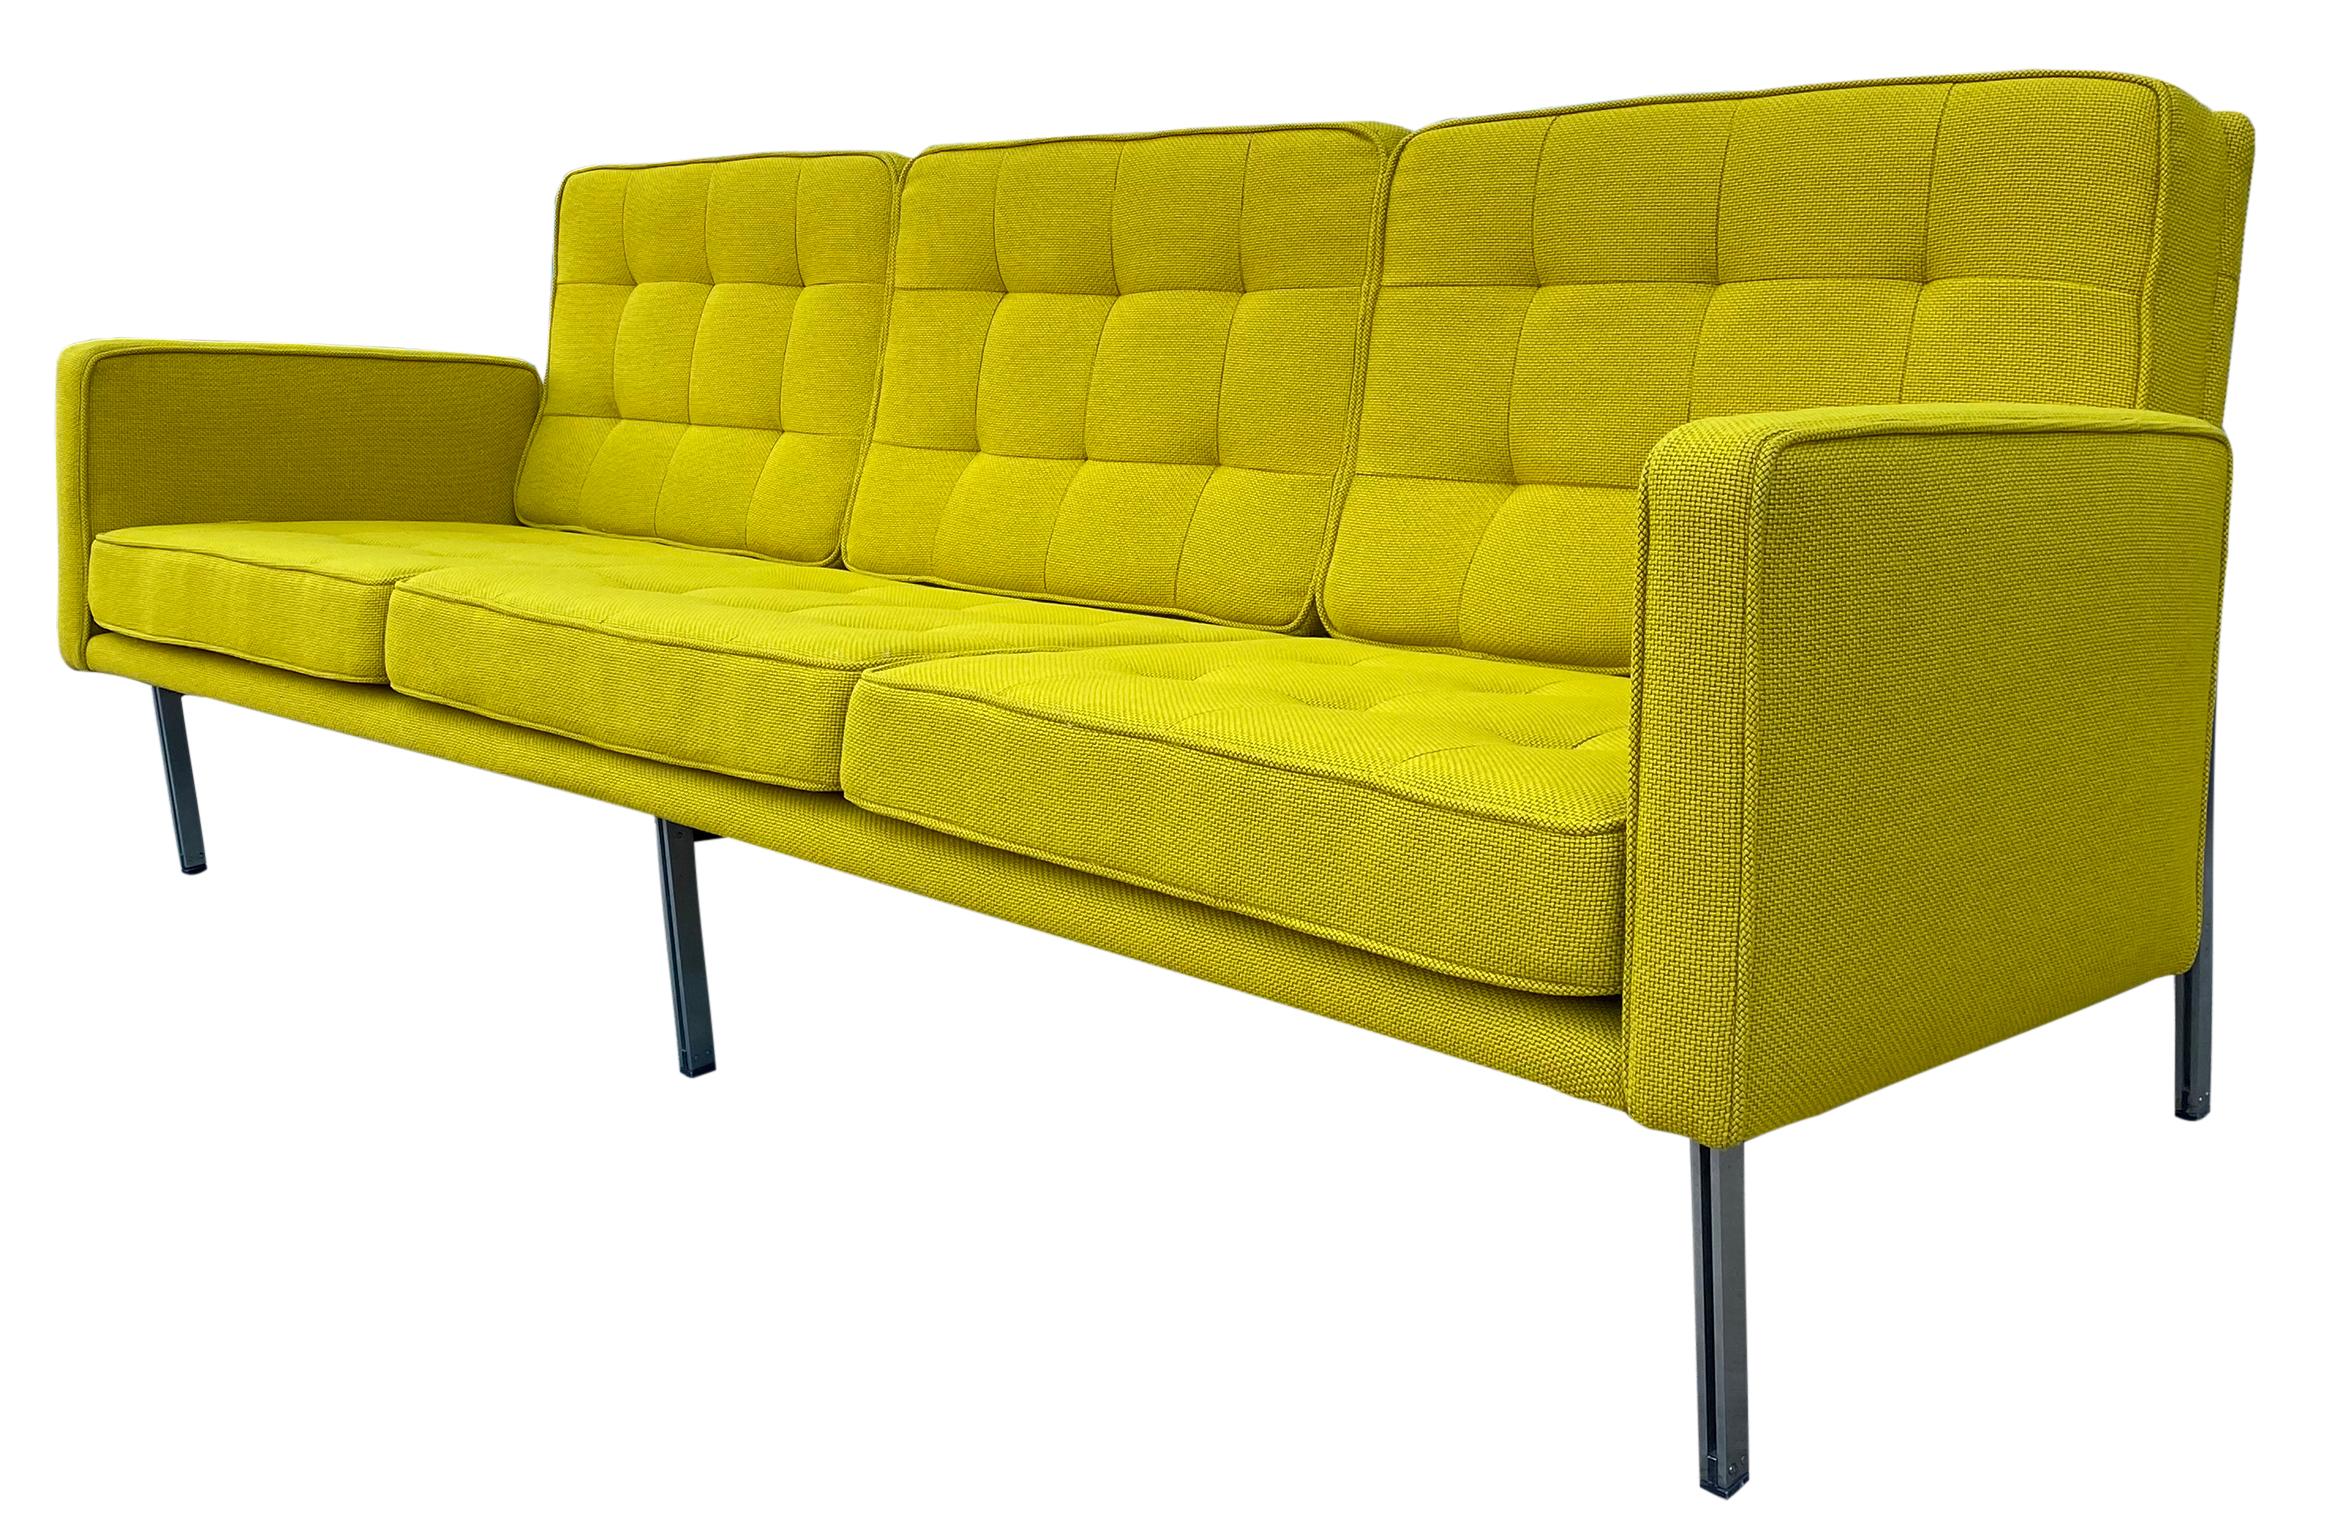 Mid-Century Modern Midcentury Florence Knoll Sofa #57 Parallel Bar System Newly Restored